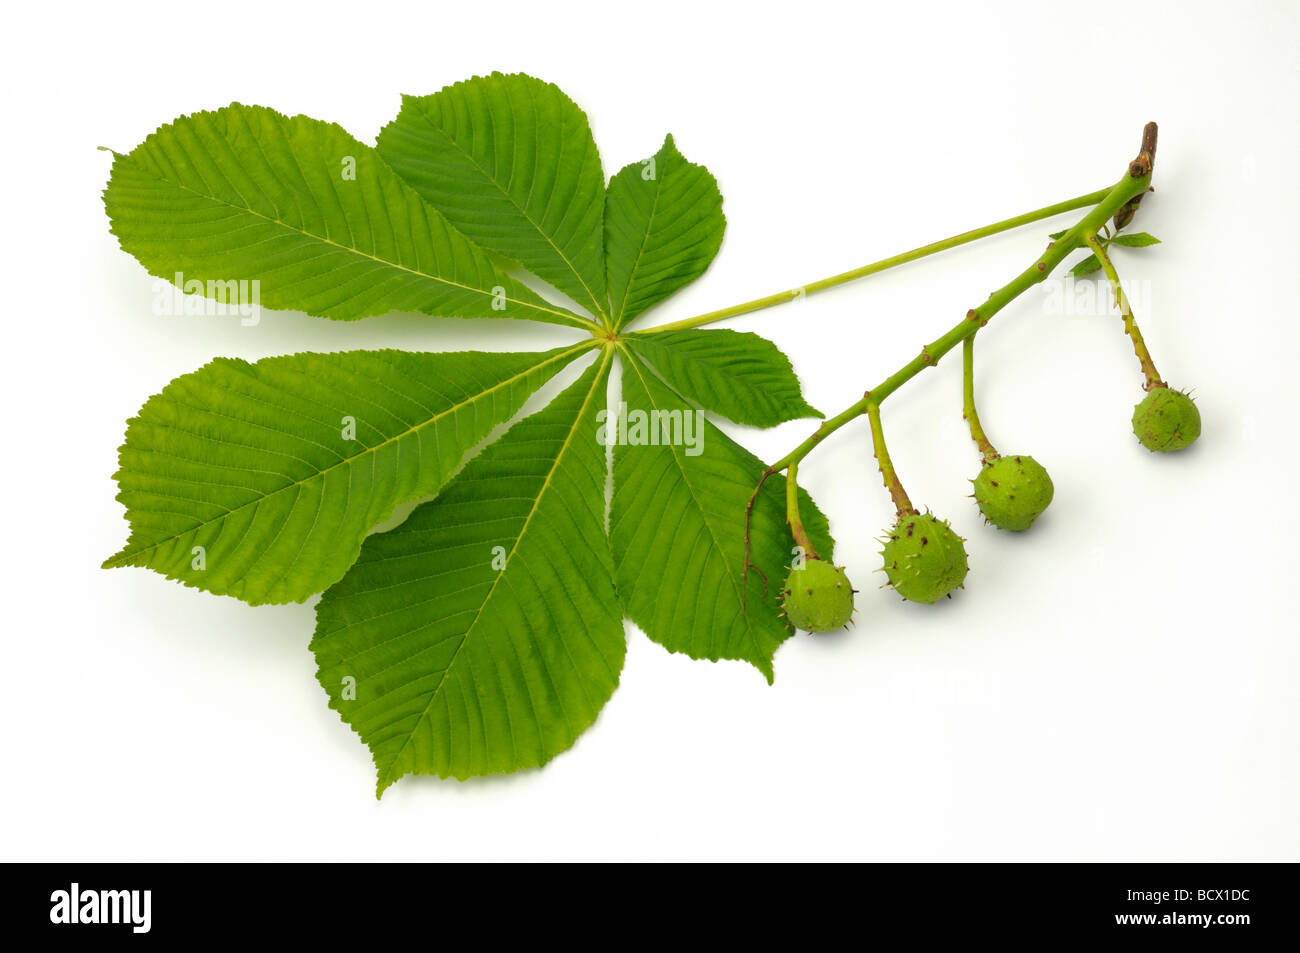 Horse Chestnut (Aesculus hippocastanum), twig with leaf and young ...